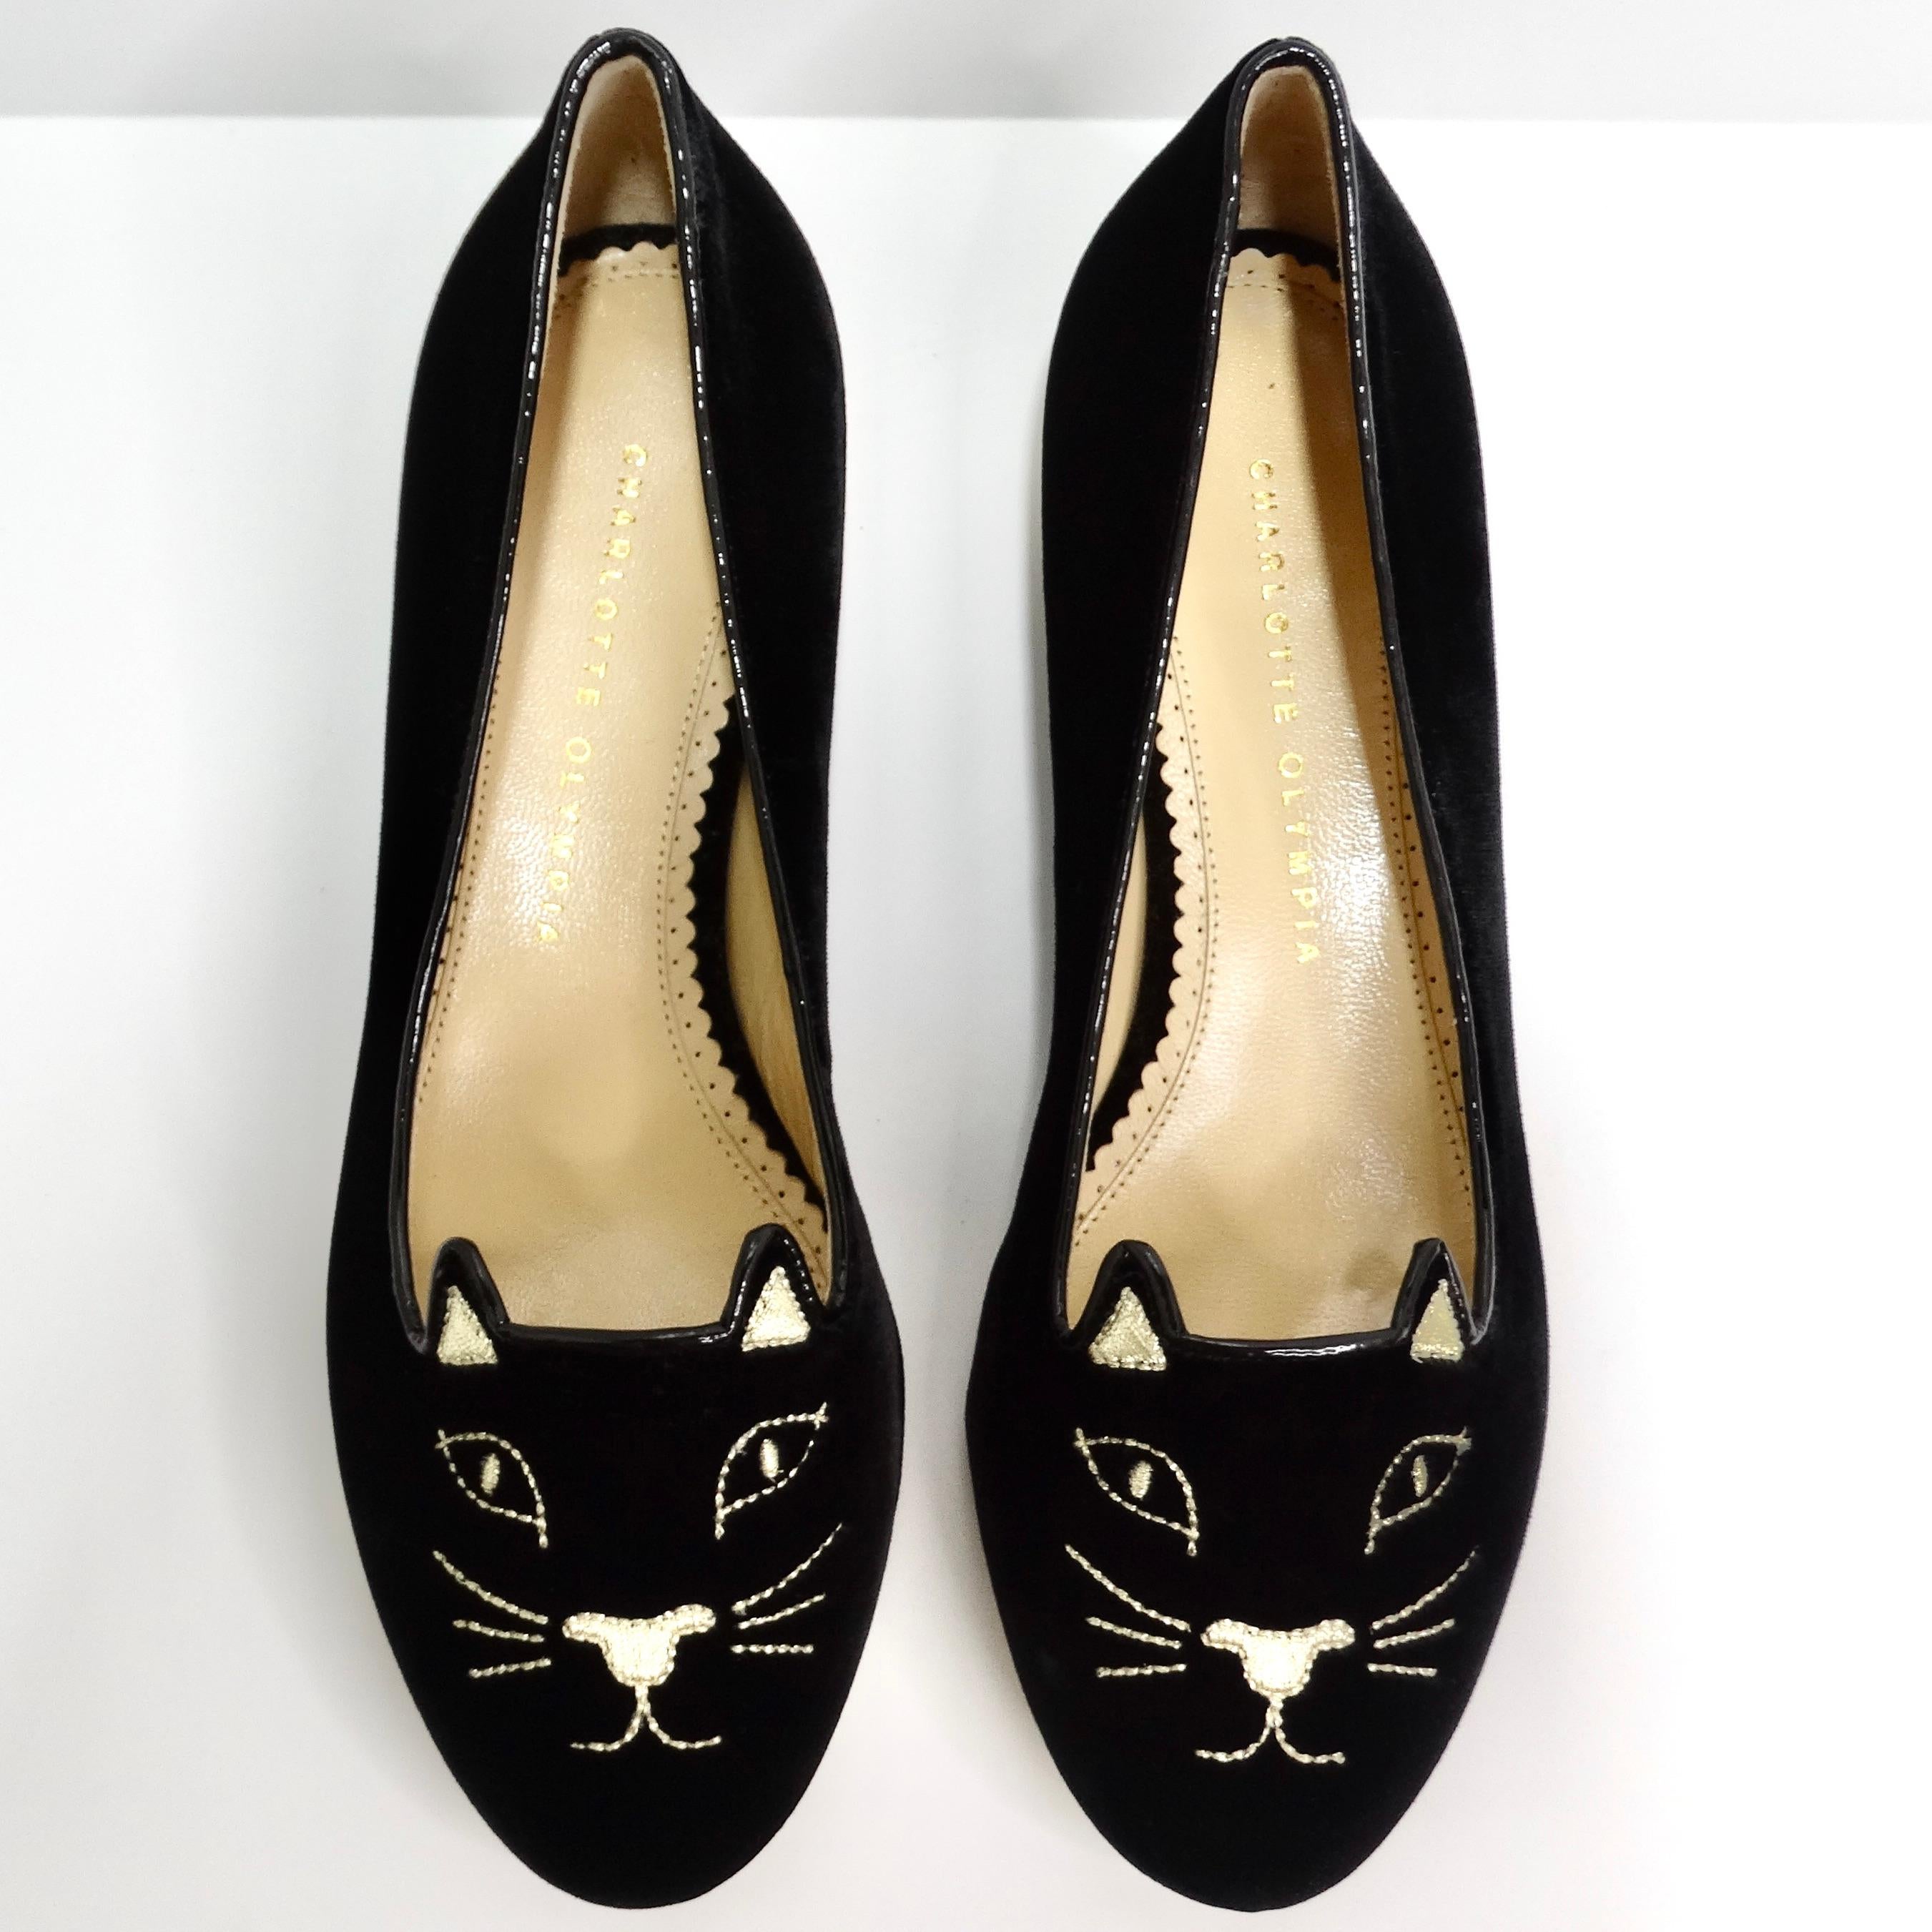 Introducing the Charlotte Olympia Designer Signed Kitty Embroidered Flats, the ultimate playful statement piece for cat lovers. These black velvet flats feature a delightful metallic gold kitty cat embroidery on the toe, adding a touch of whimsical